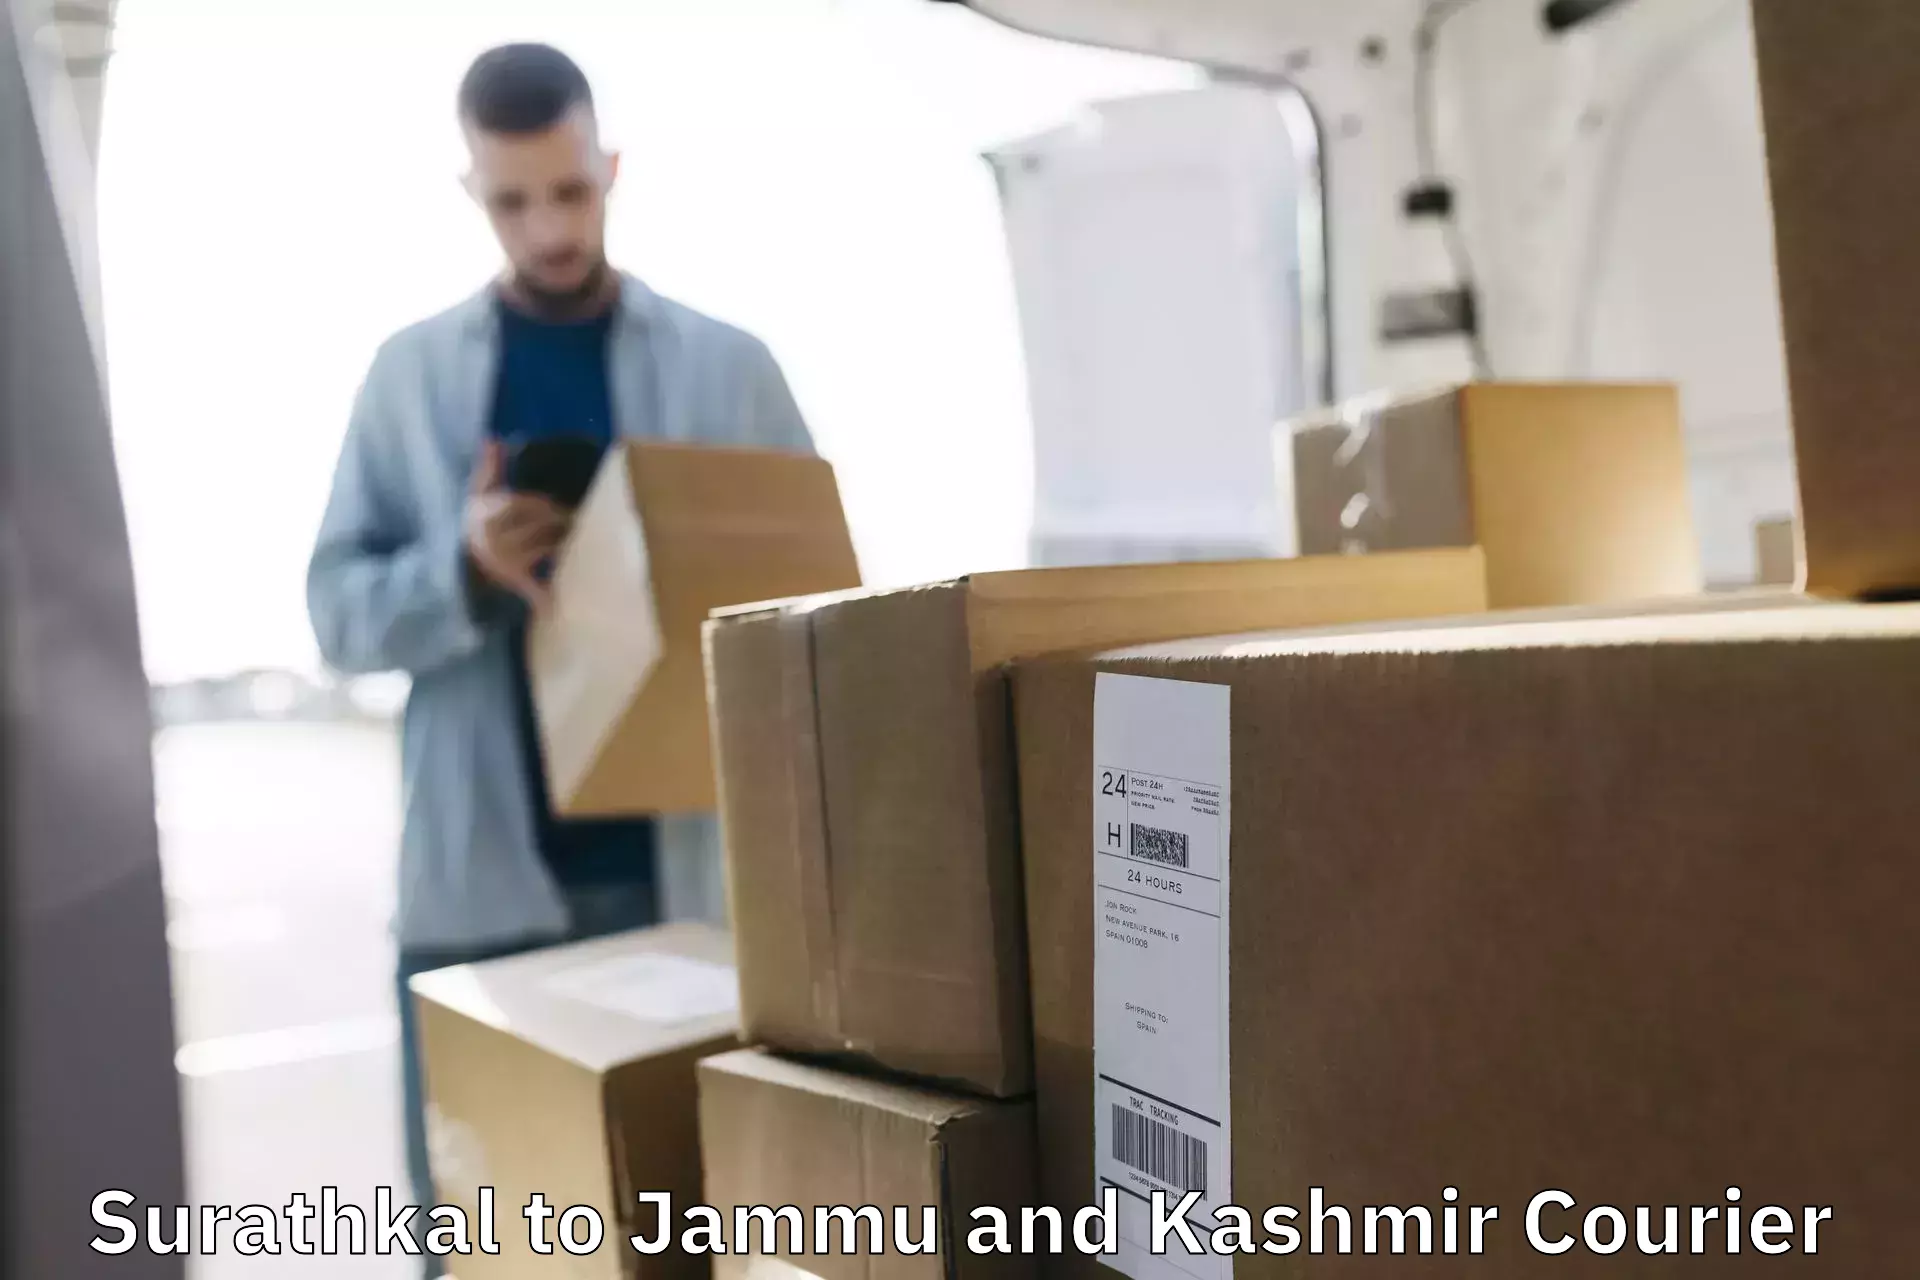 Subscription-based courier Surathkal to Shopian